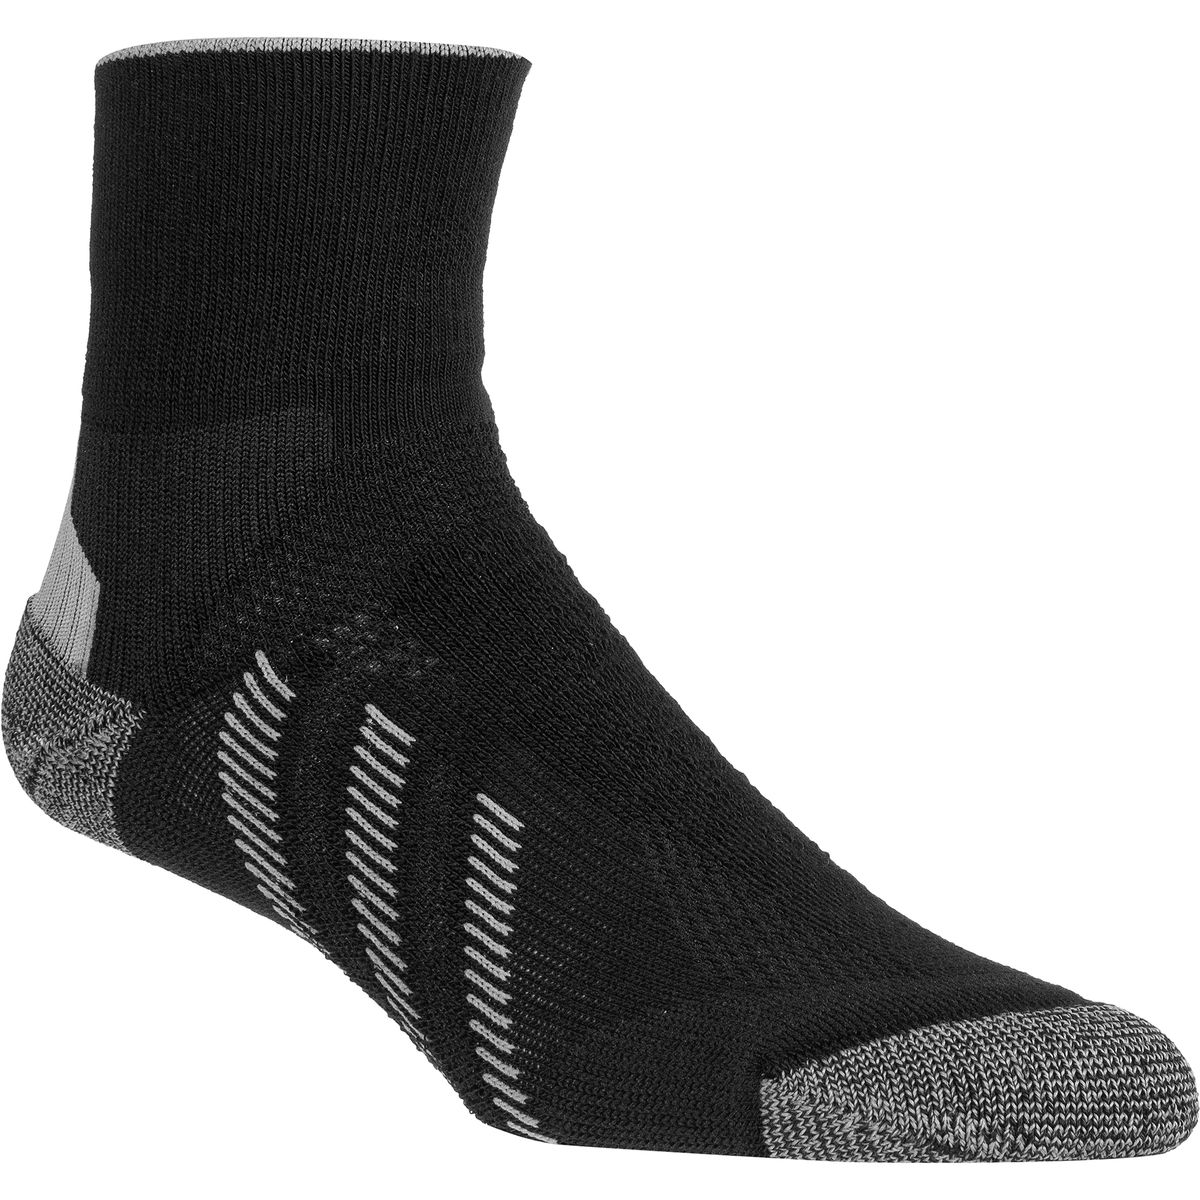 Showers Pass Torch Ankle Sock - Men's